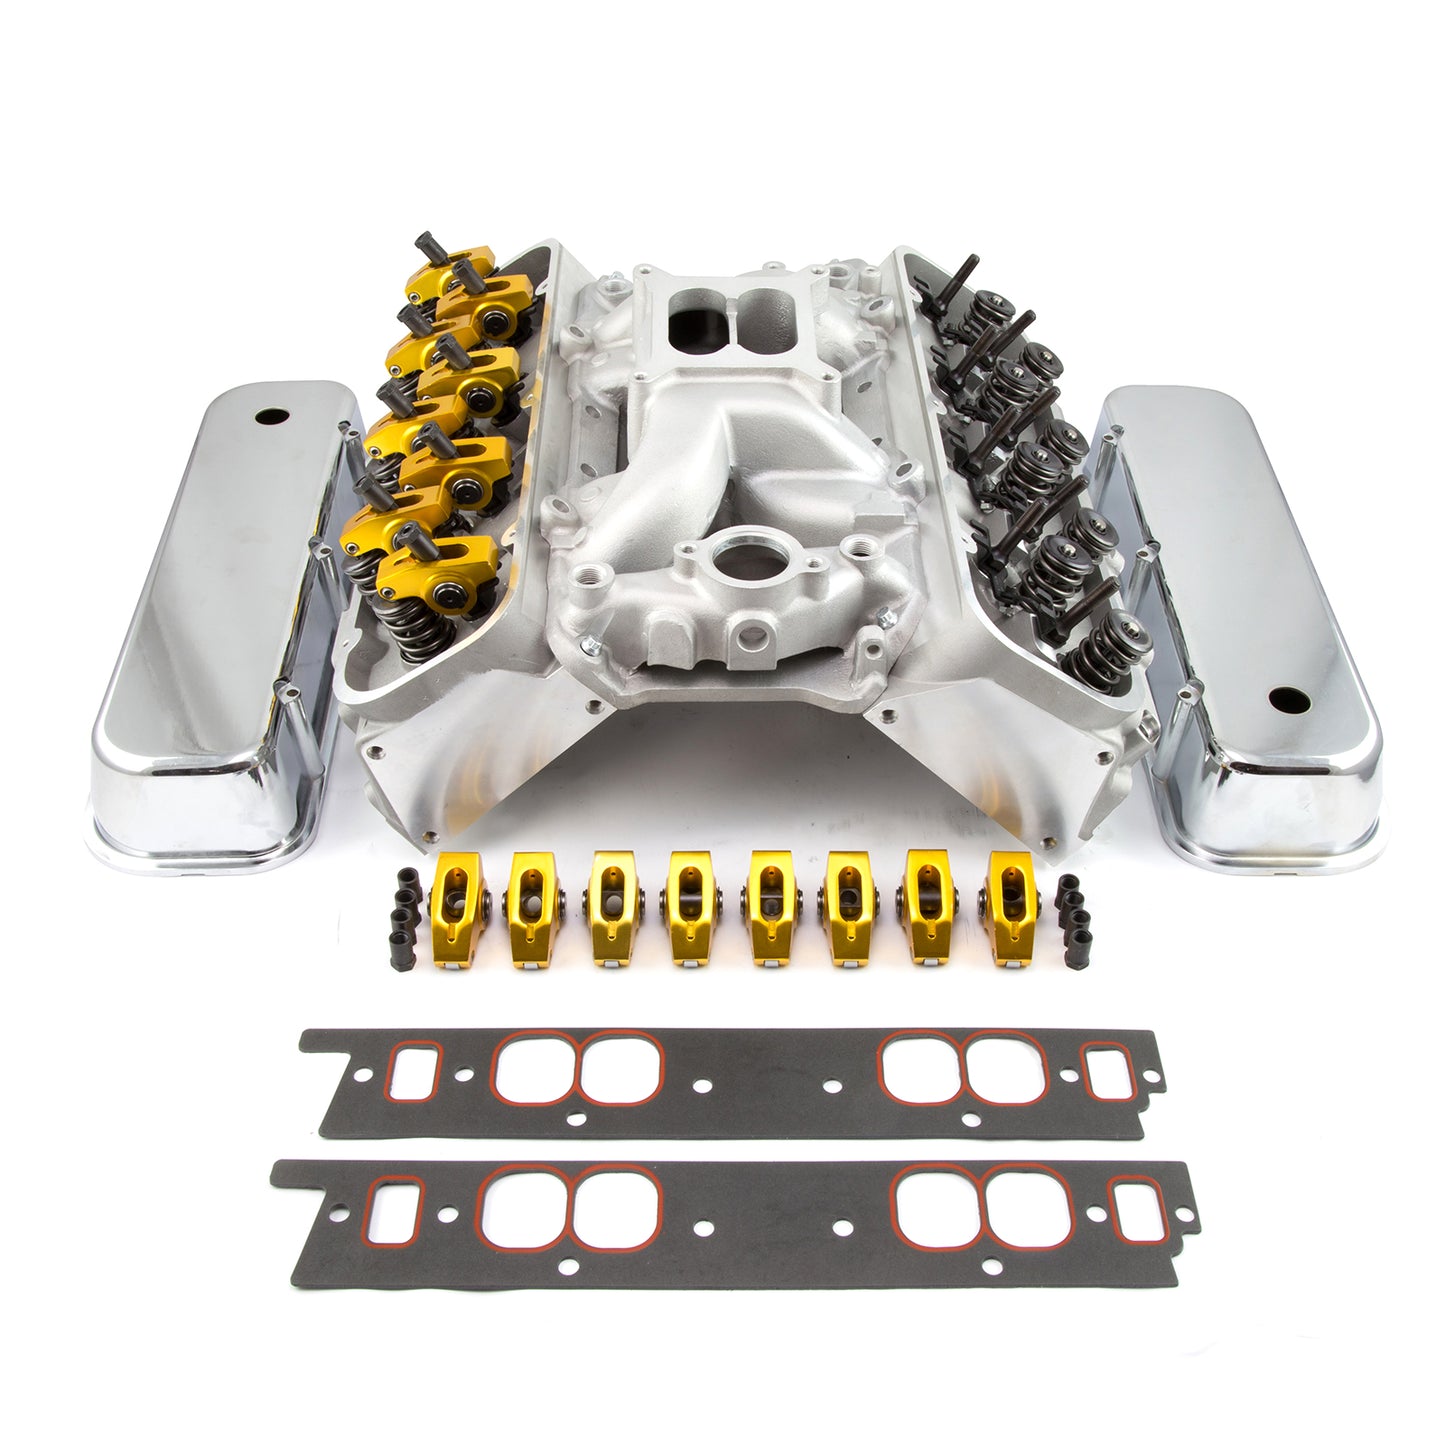 Speedmaster PCE435.1014 Fits Chevy BBC 396 Solid FT Cylinder Head Top End Engine Combo Kit